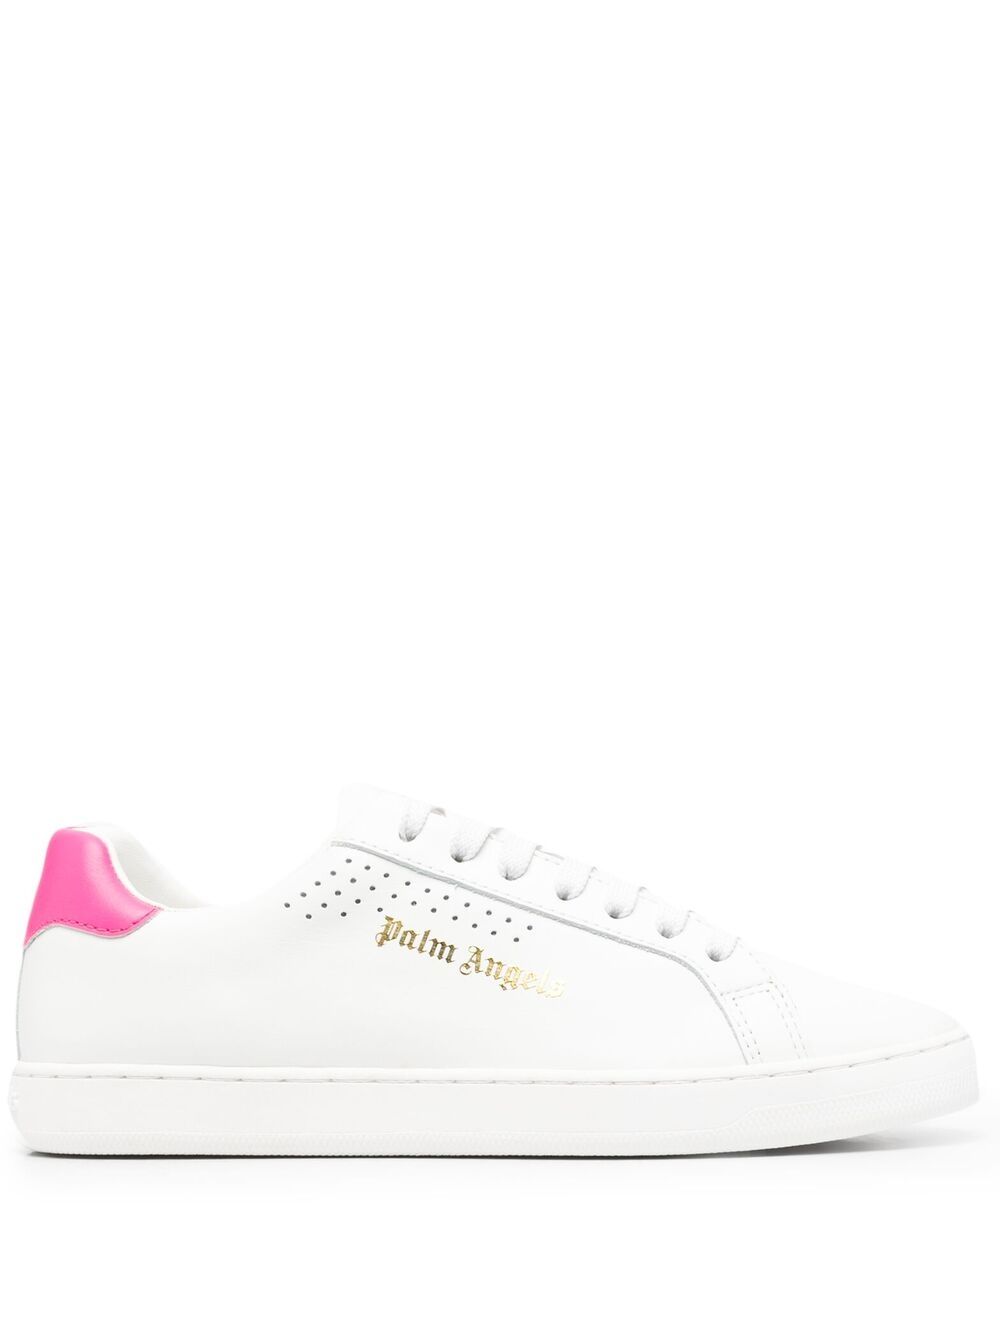 Palm One Leather Sneakers дамски обувки Palm Angels 845693231_37